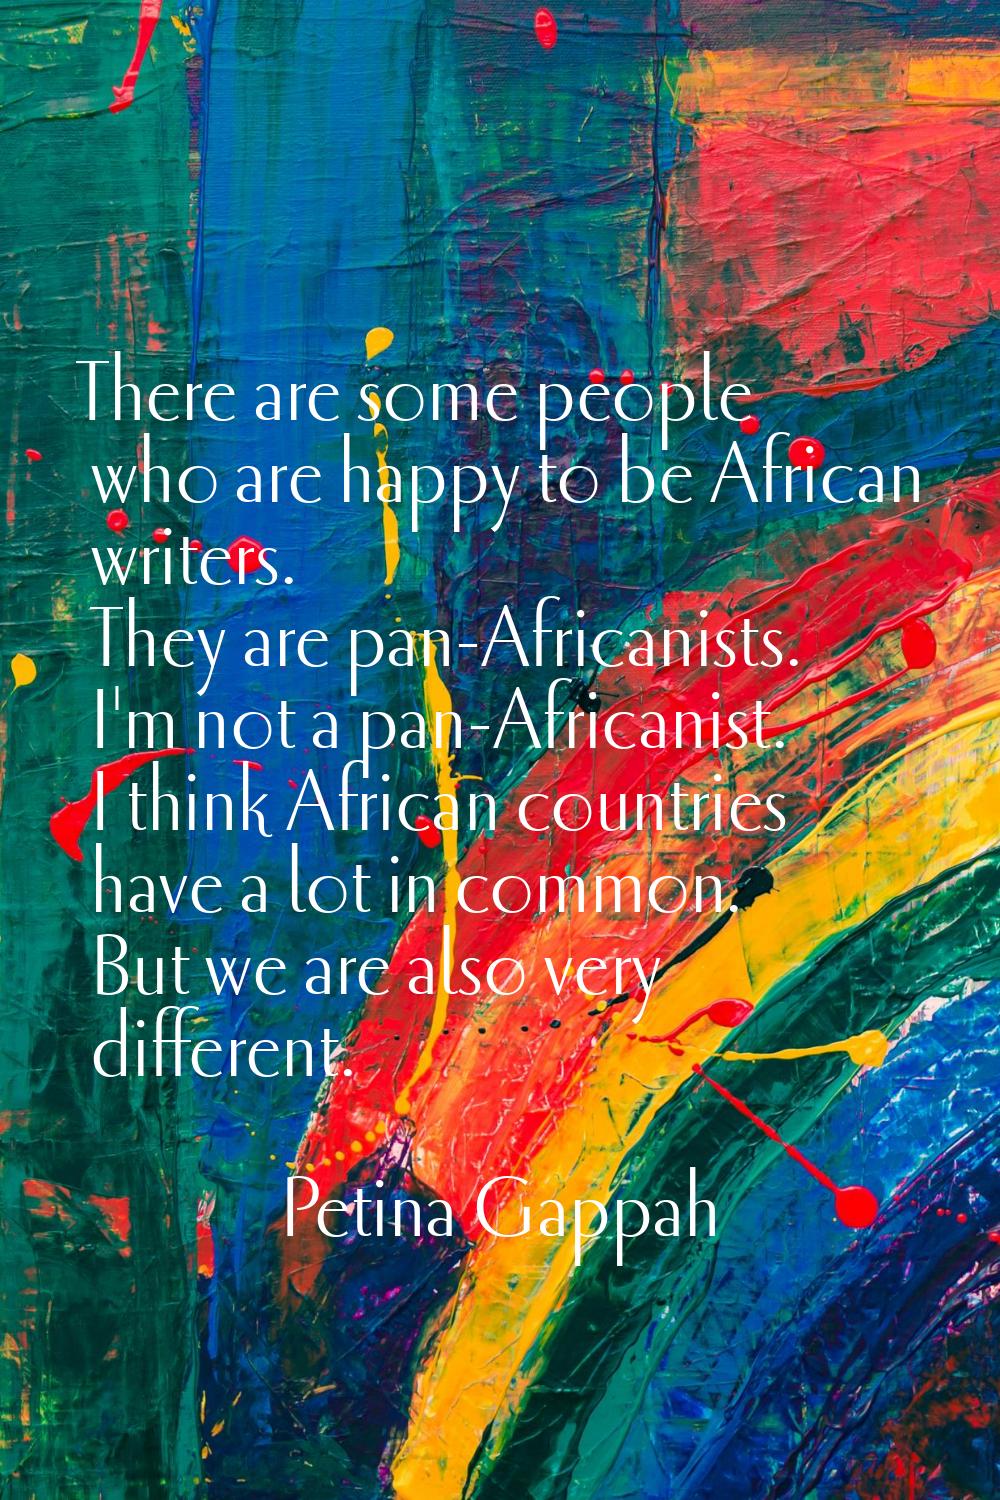 There are some people who are happy to be African writers. They are pan-Africanists. I'm not a pan-